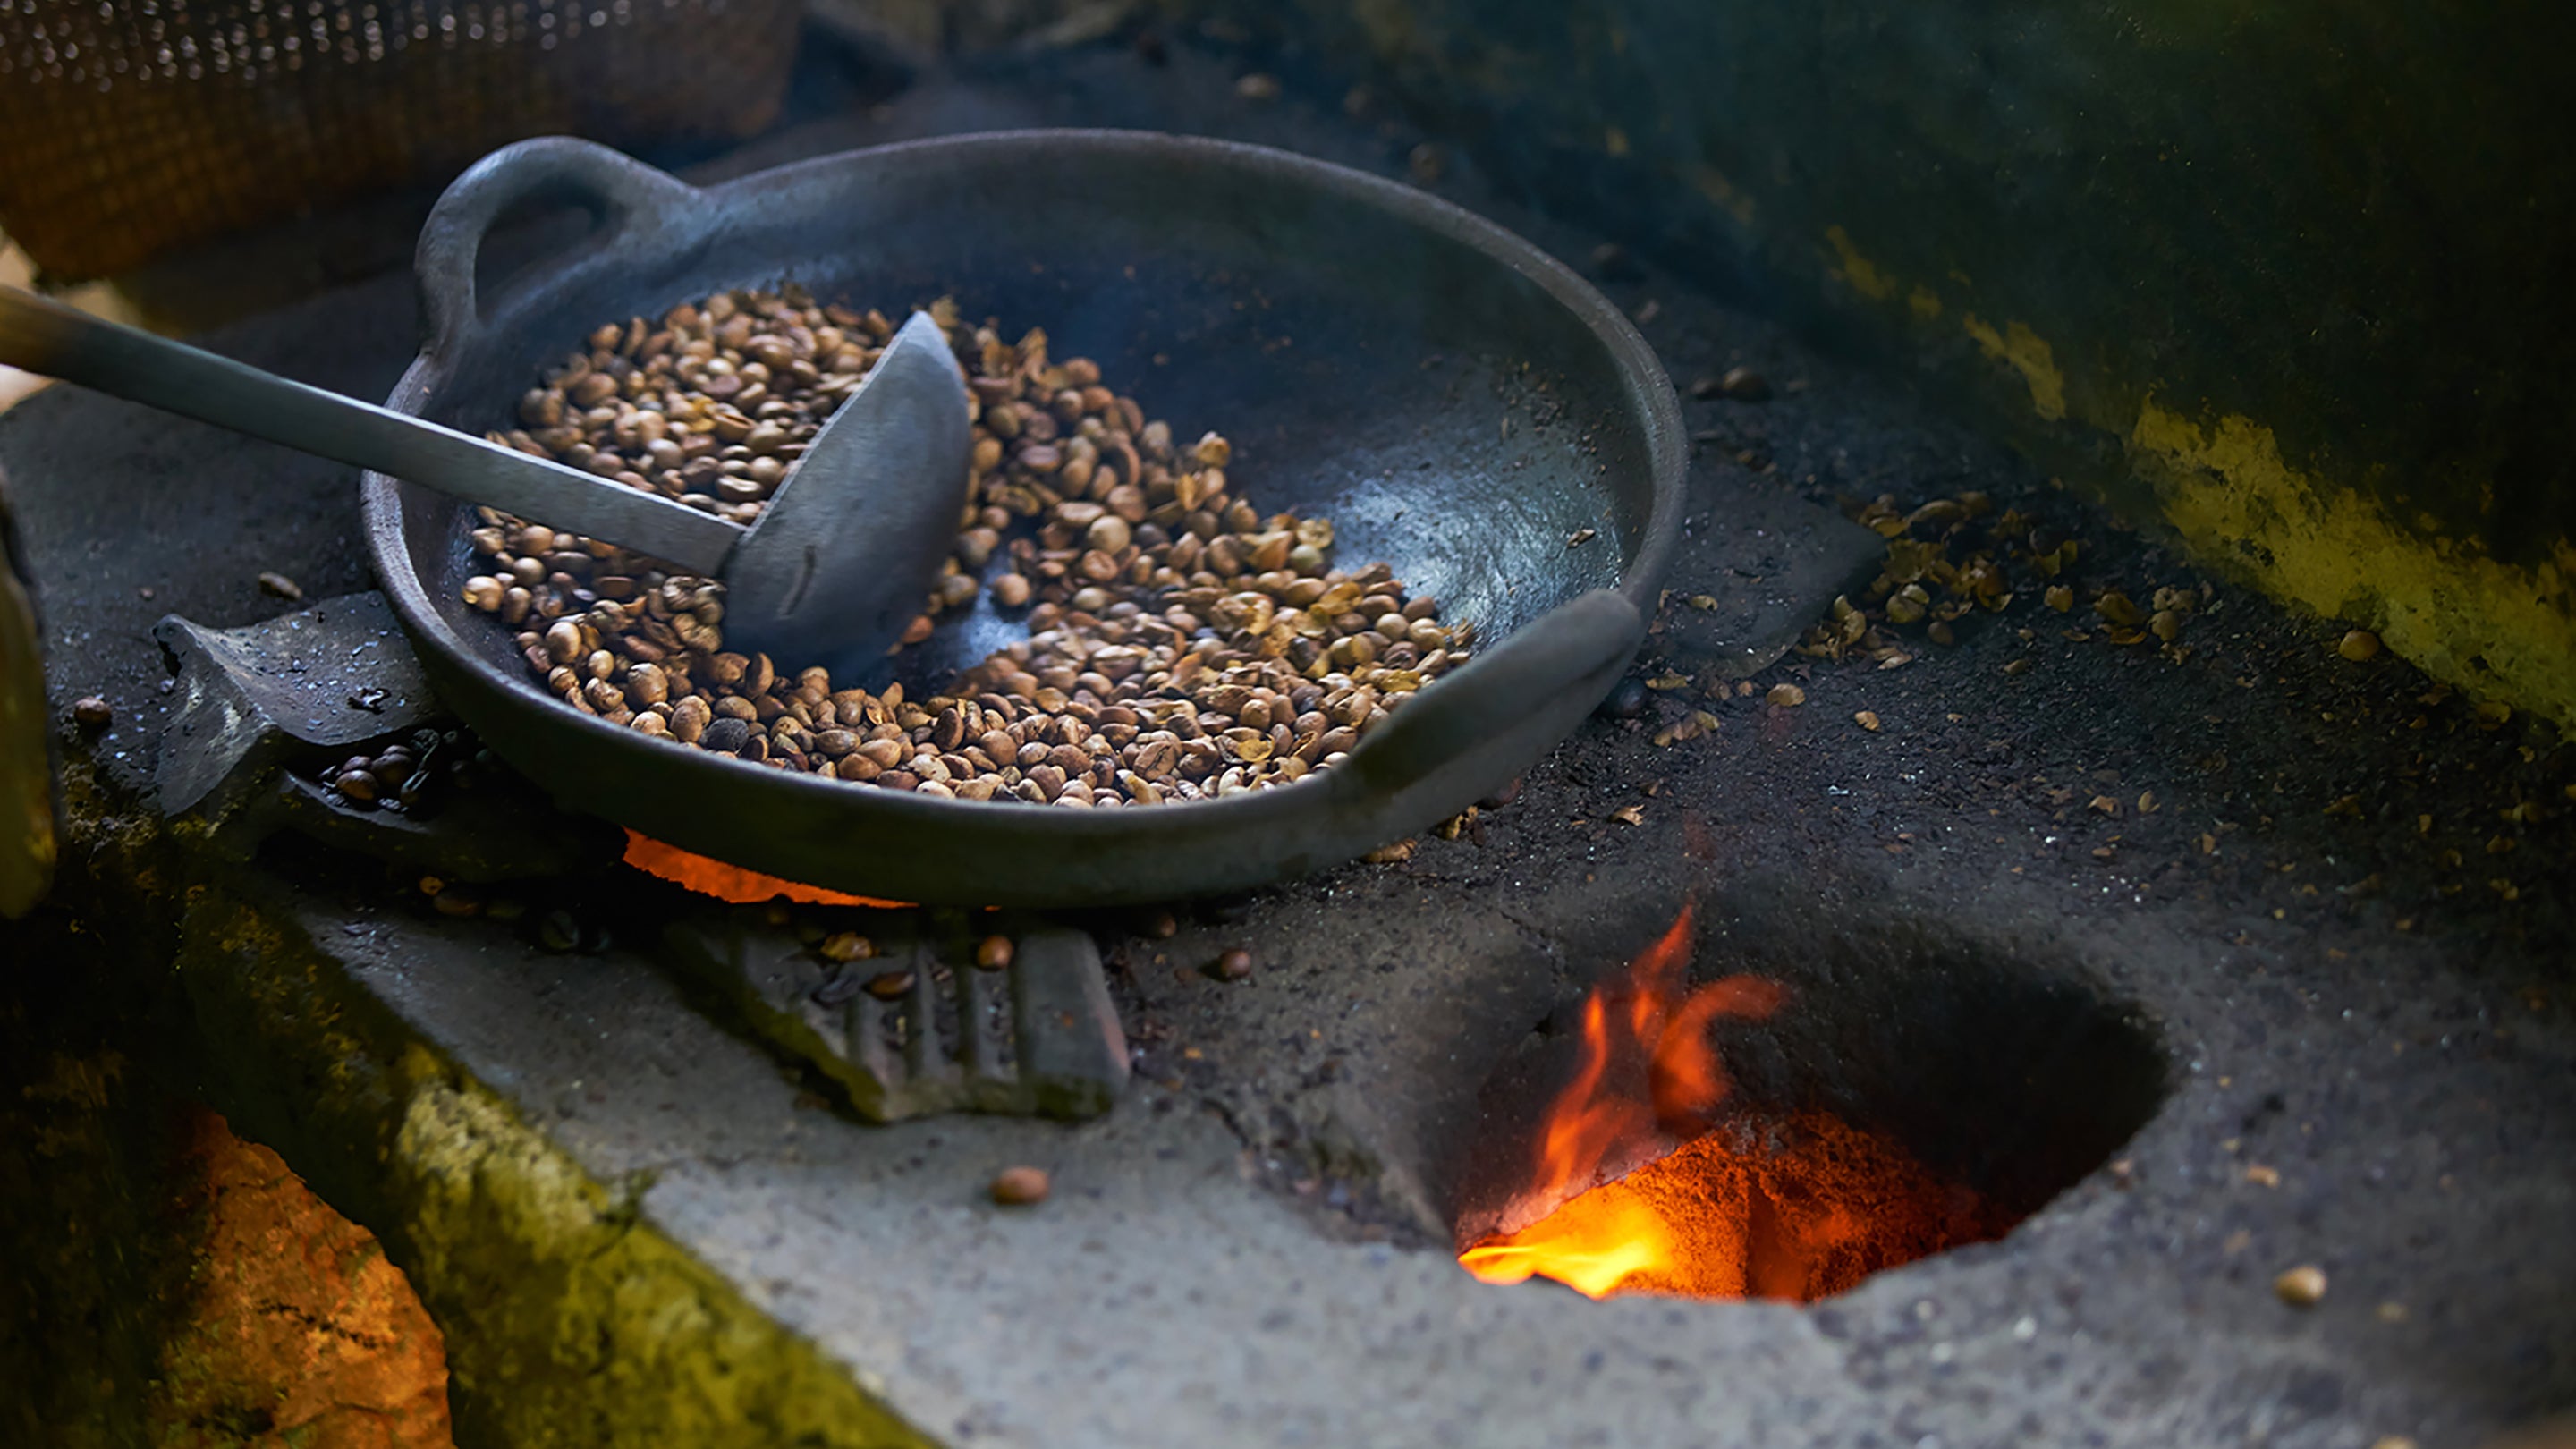 Bali Traditional Coffee Bean Roasting Over Fire